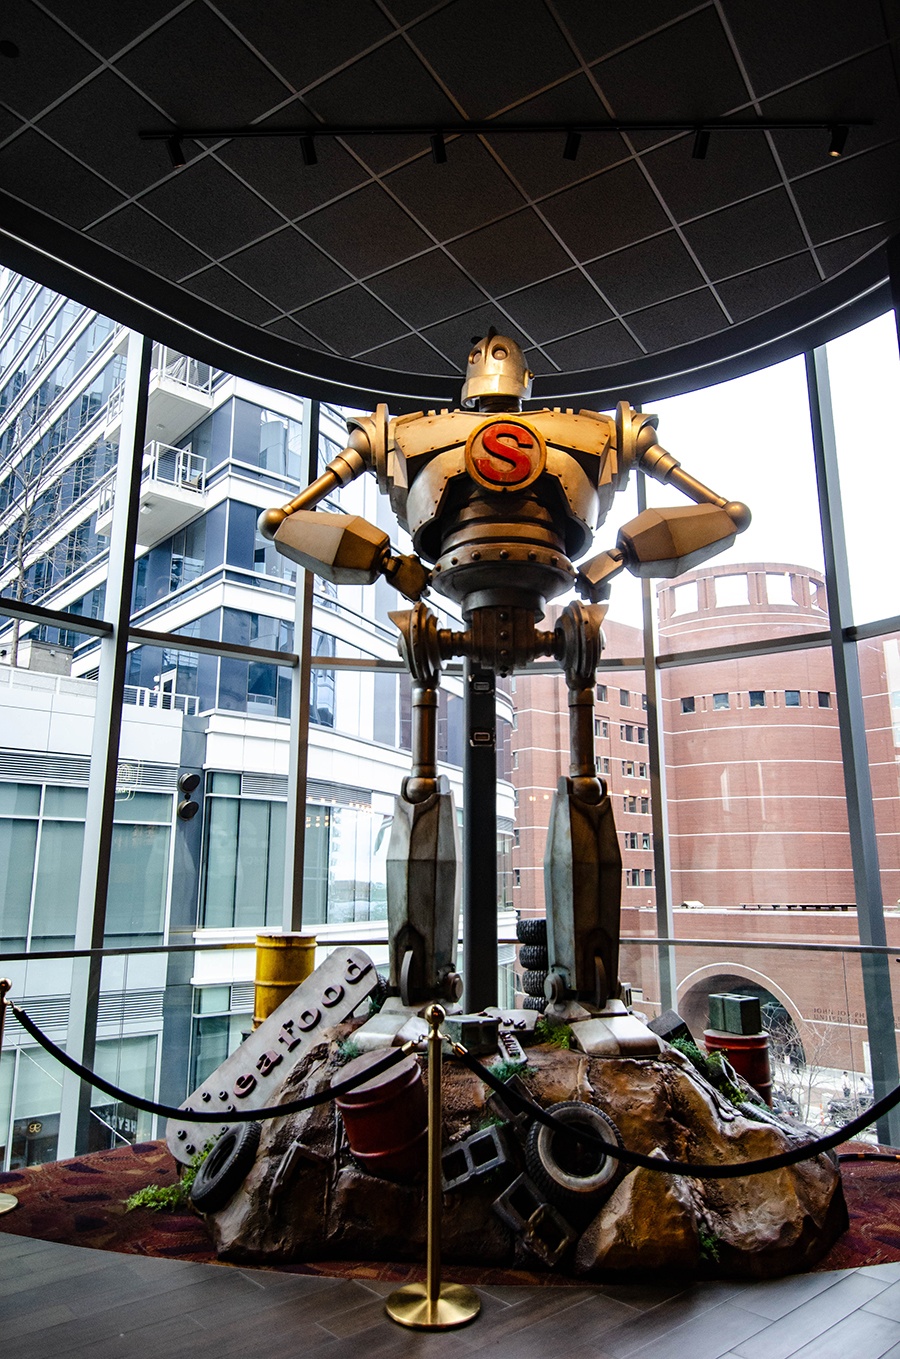 A tall metal sculpture of a giant stands on a pile of debris in a high-ceilinged building lobby with a city skyline visible through the windows behind.